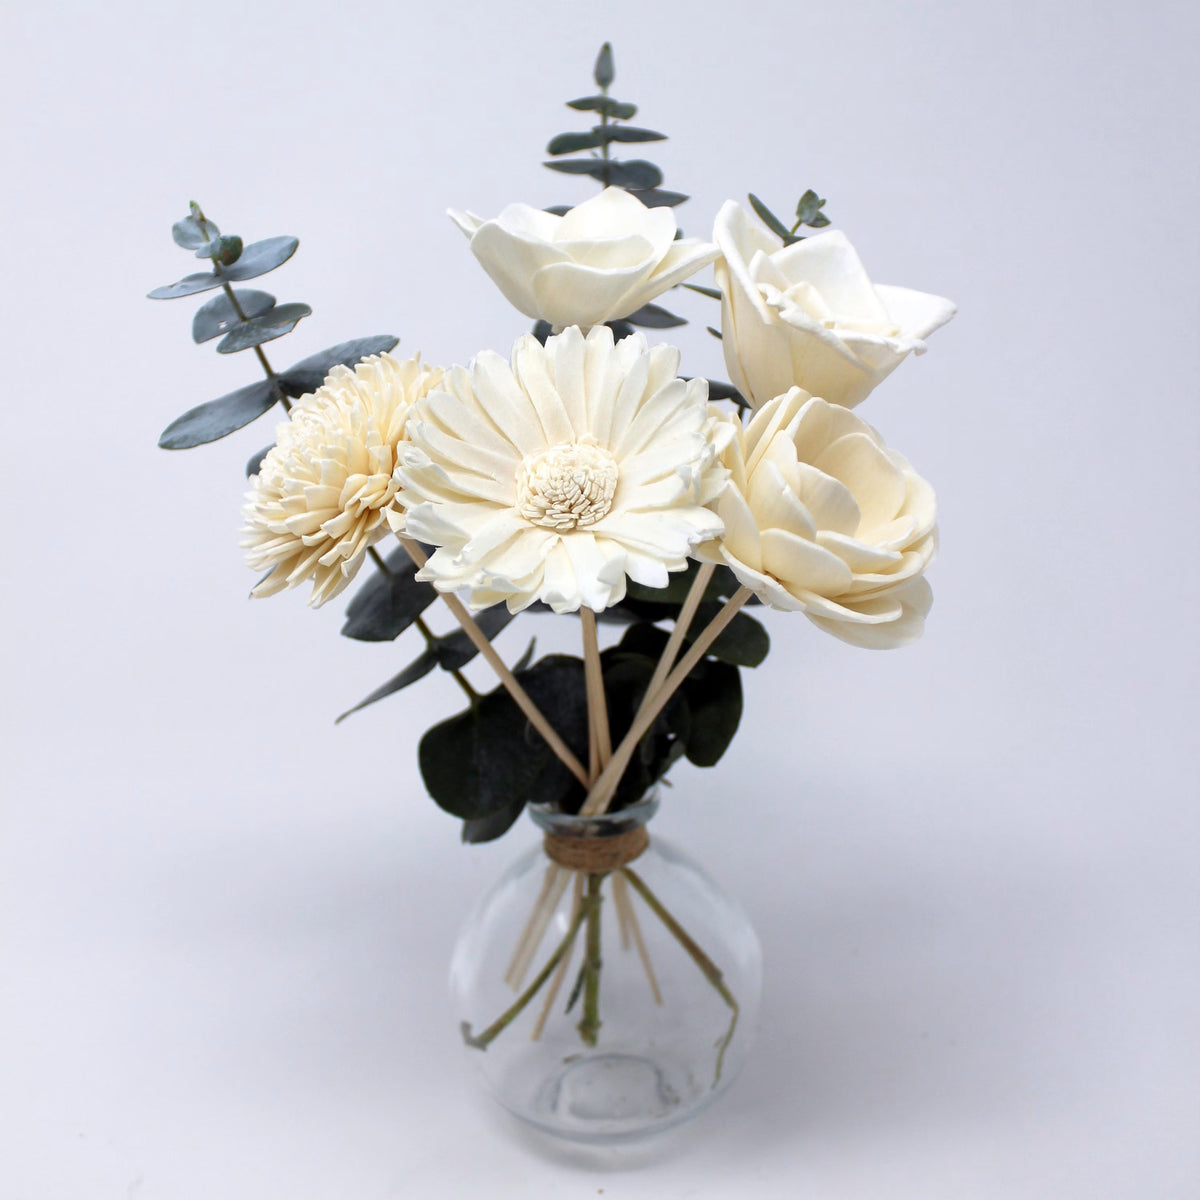 5 All White Assorted Diffuser Flower Set